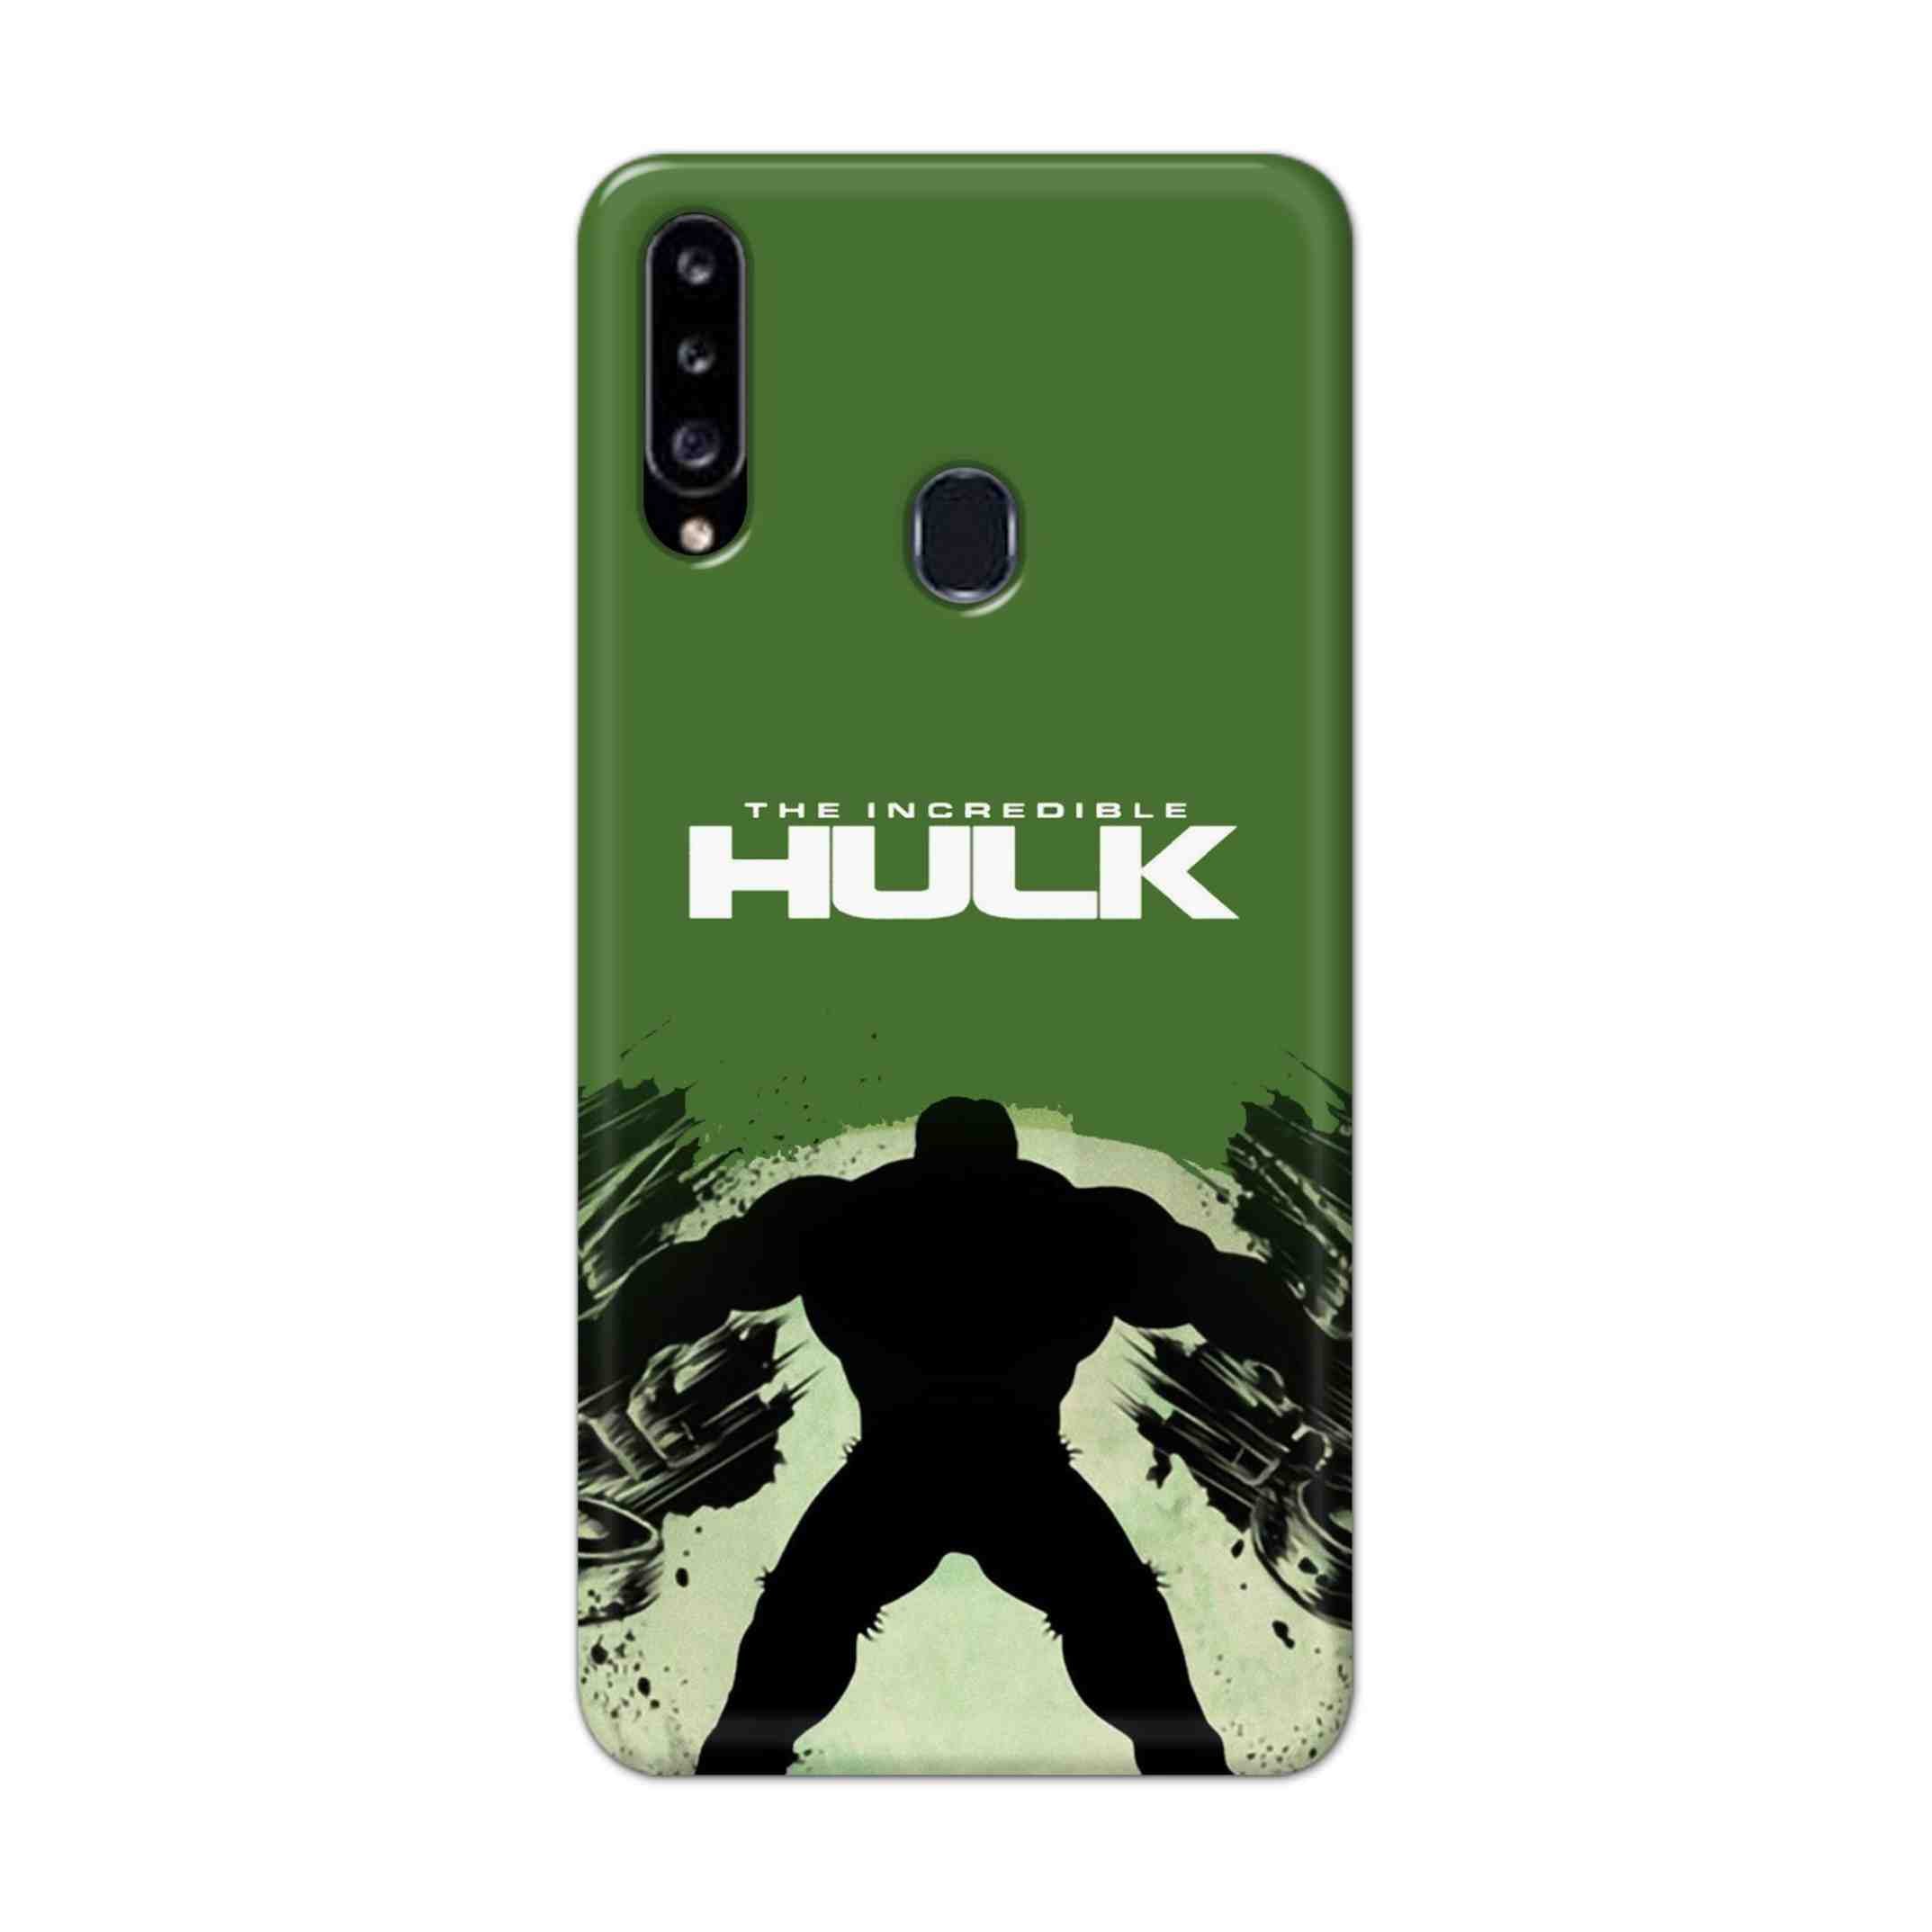 Buy Hulk Hard Back Mobile Phone Case Cover For Samsung Galaxy A21 Online